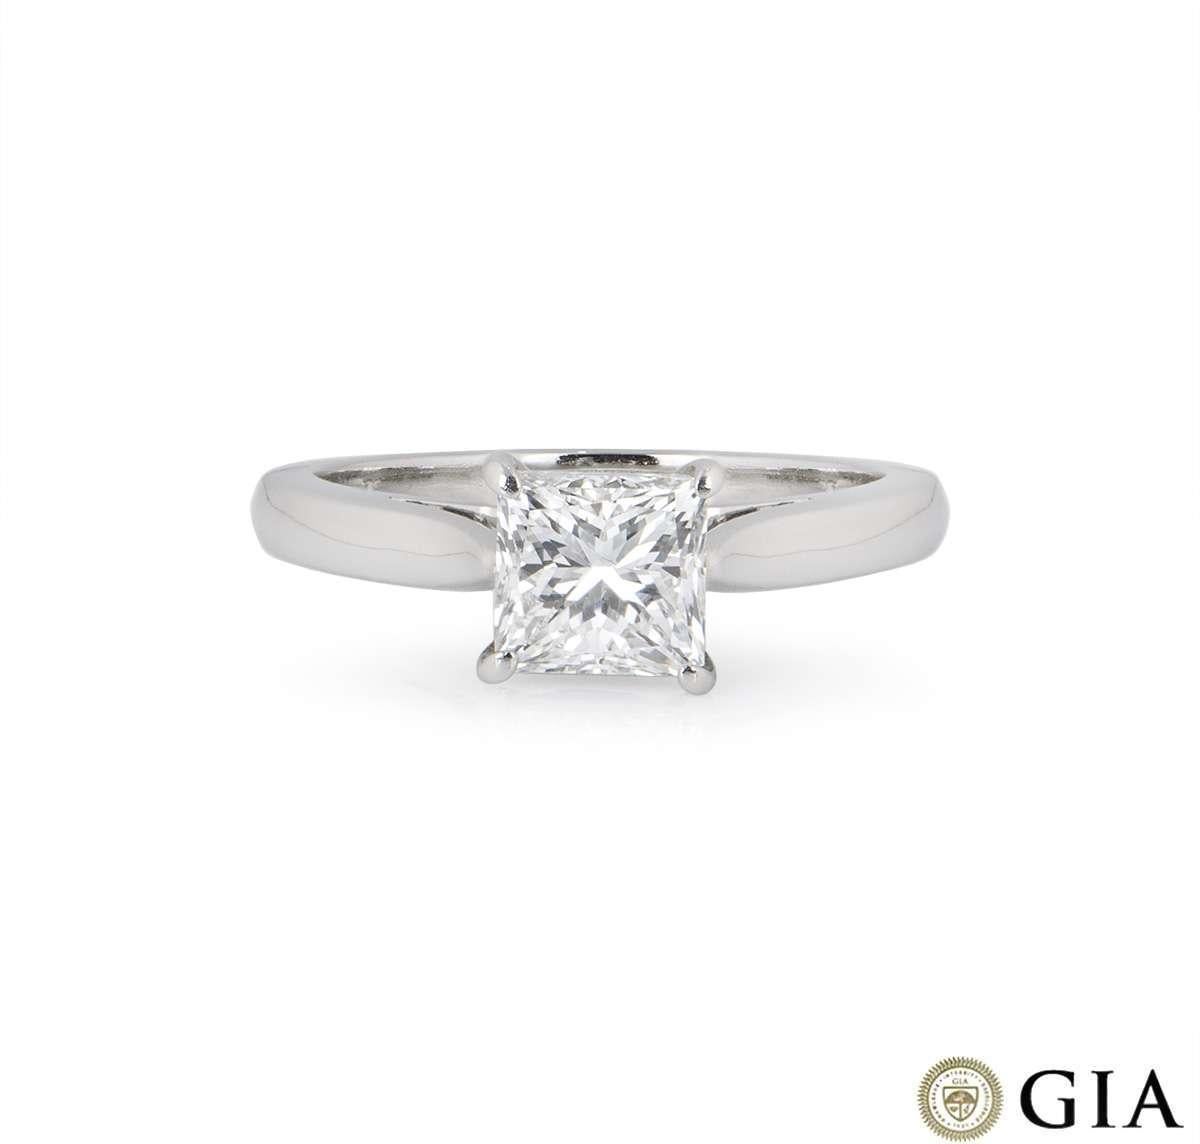 GIA Certified Platinum Princess Cut Diamond Engagement Ring 1.51 Carat F/VS2 In Excellent Condition For Sale In London, GB